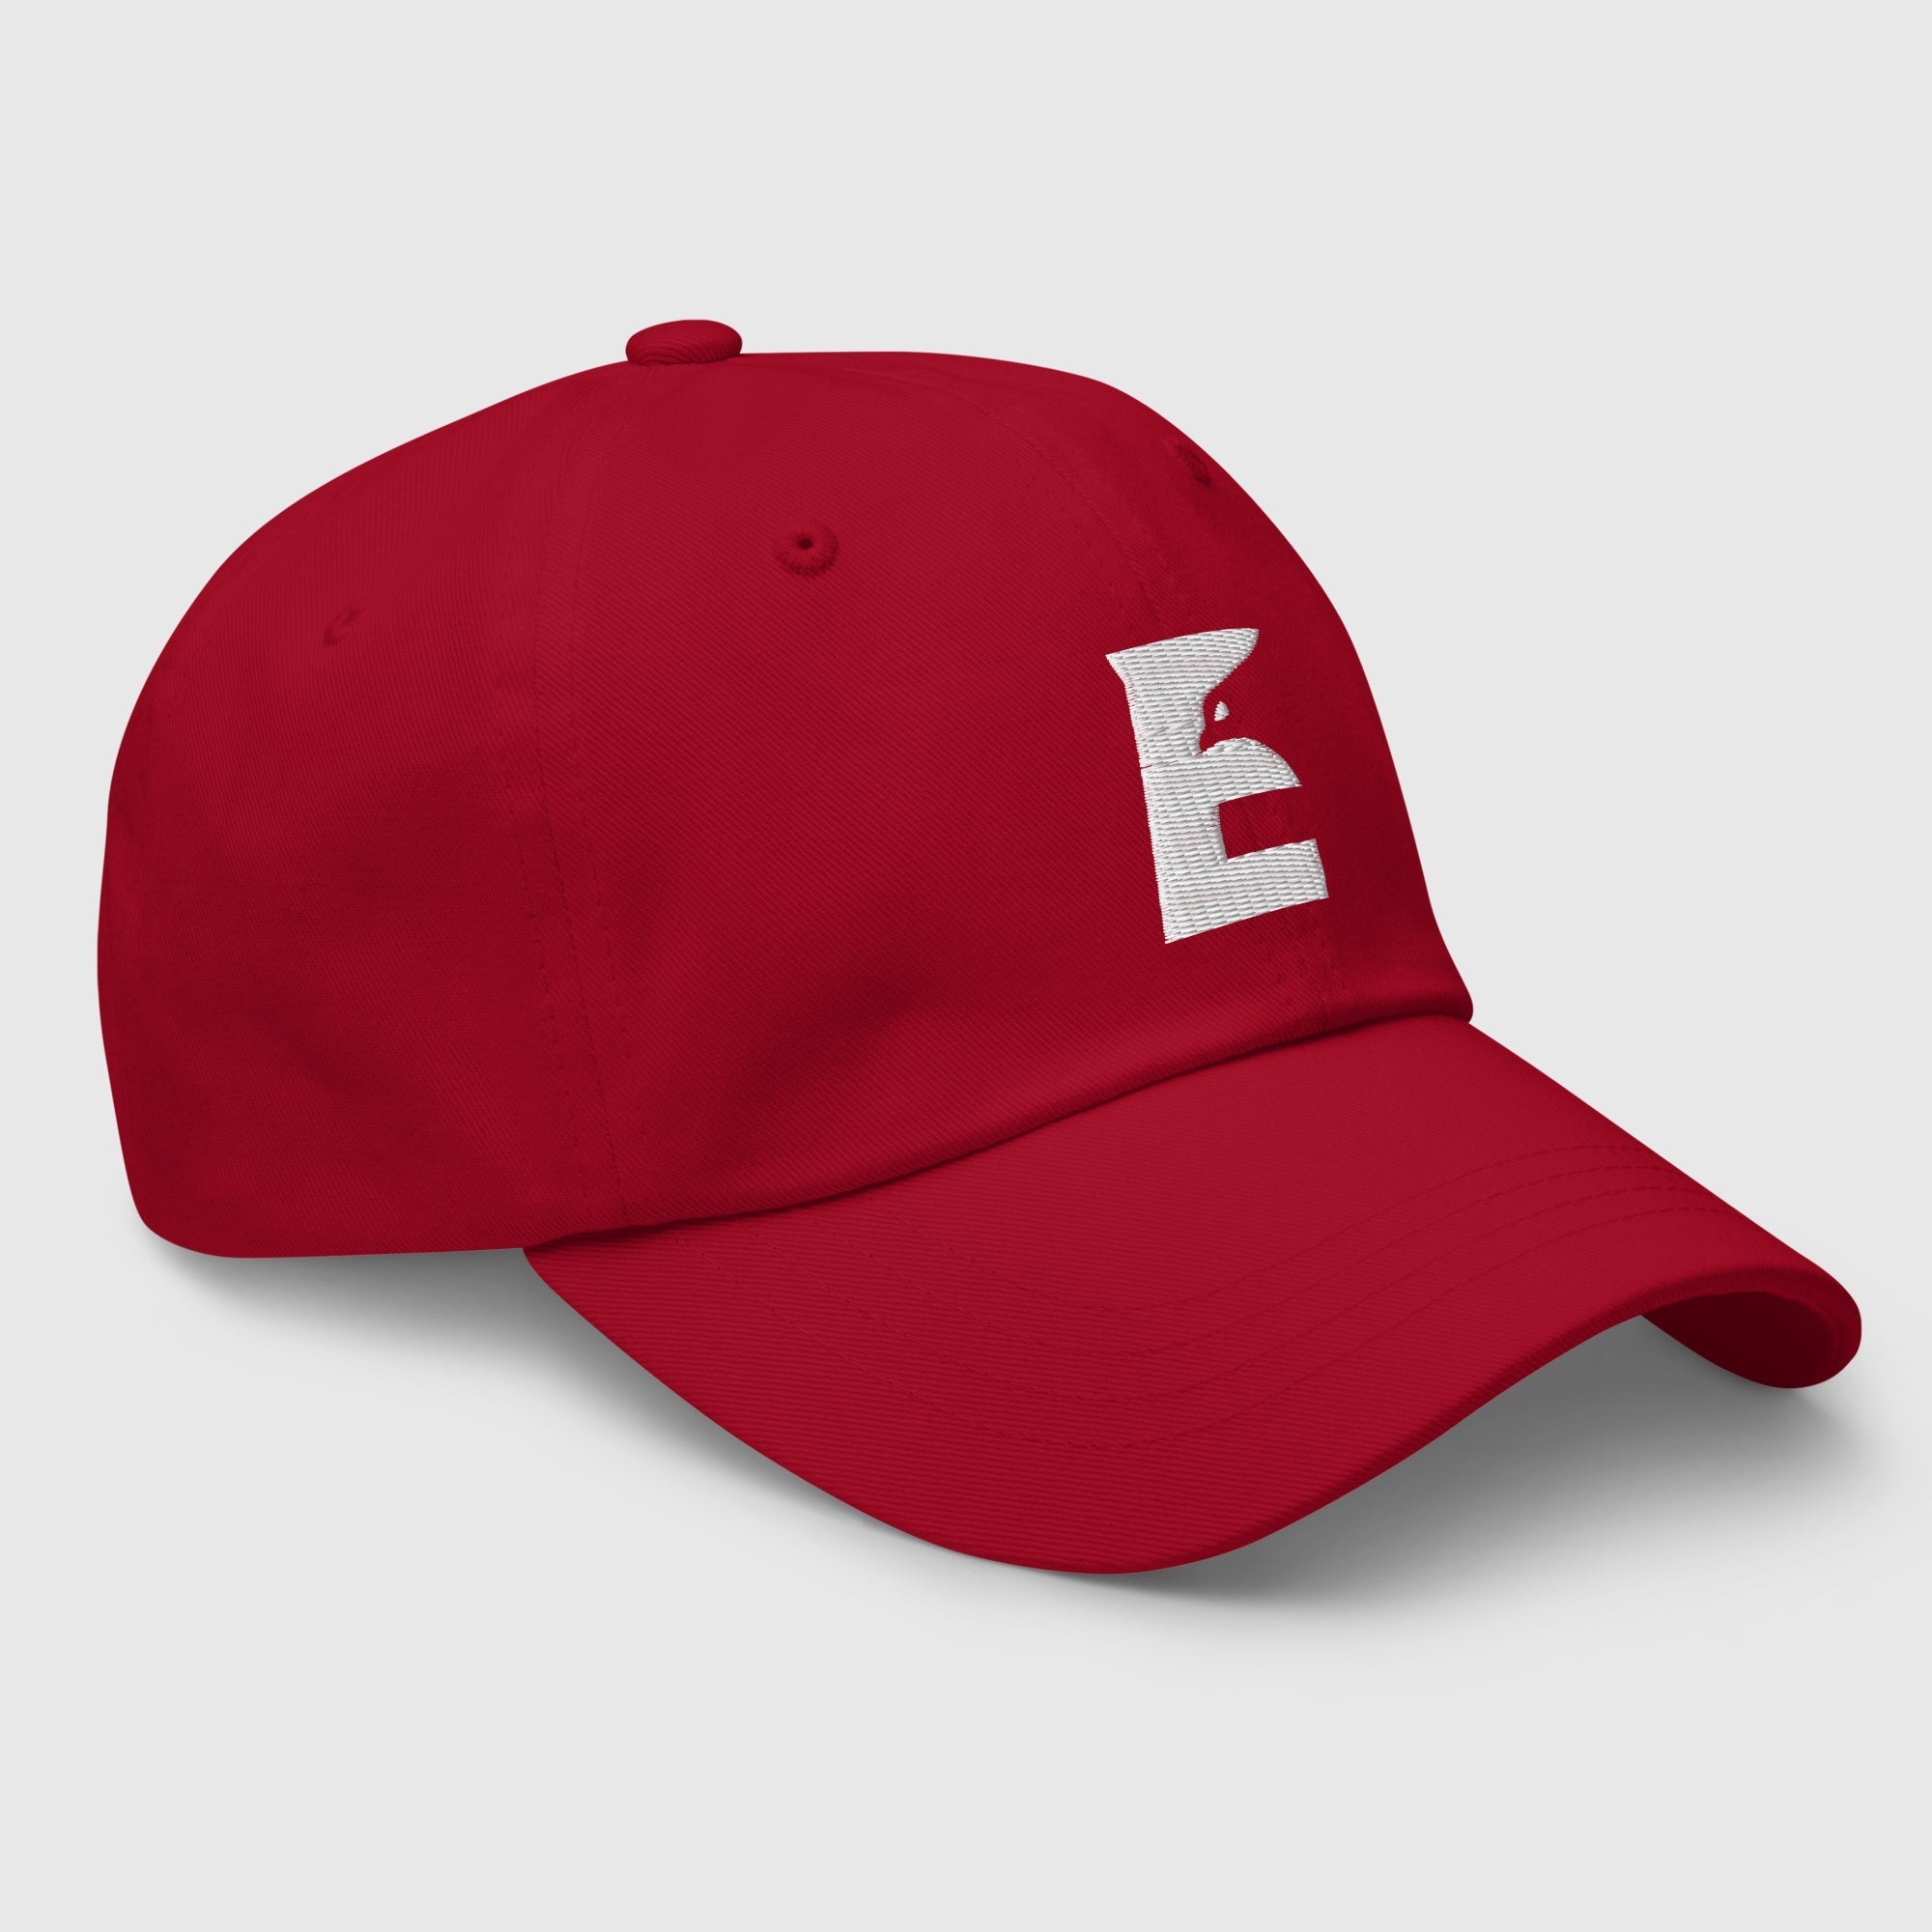 Cap Navy Red - Eagle